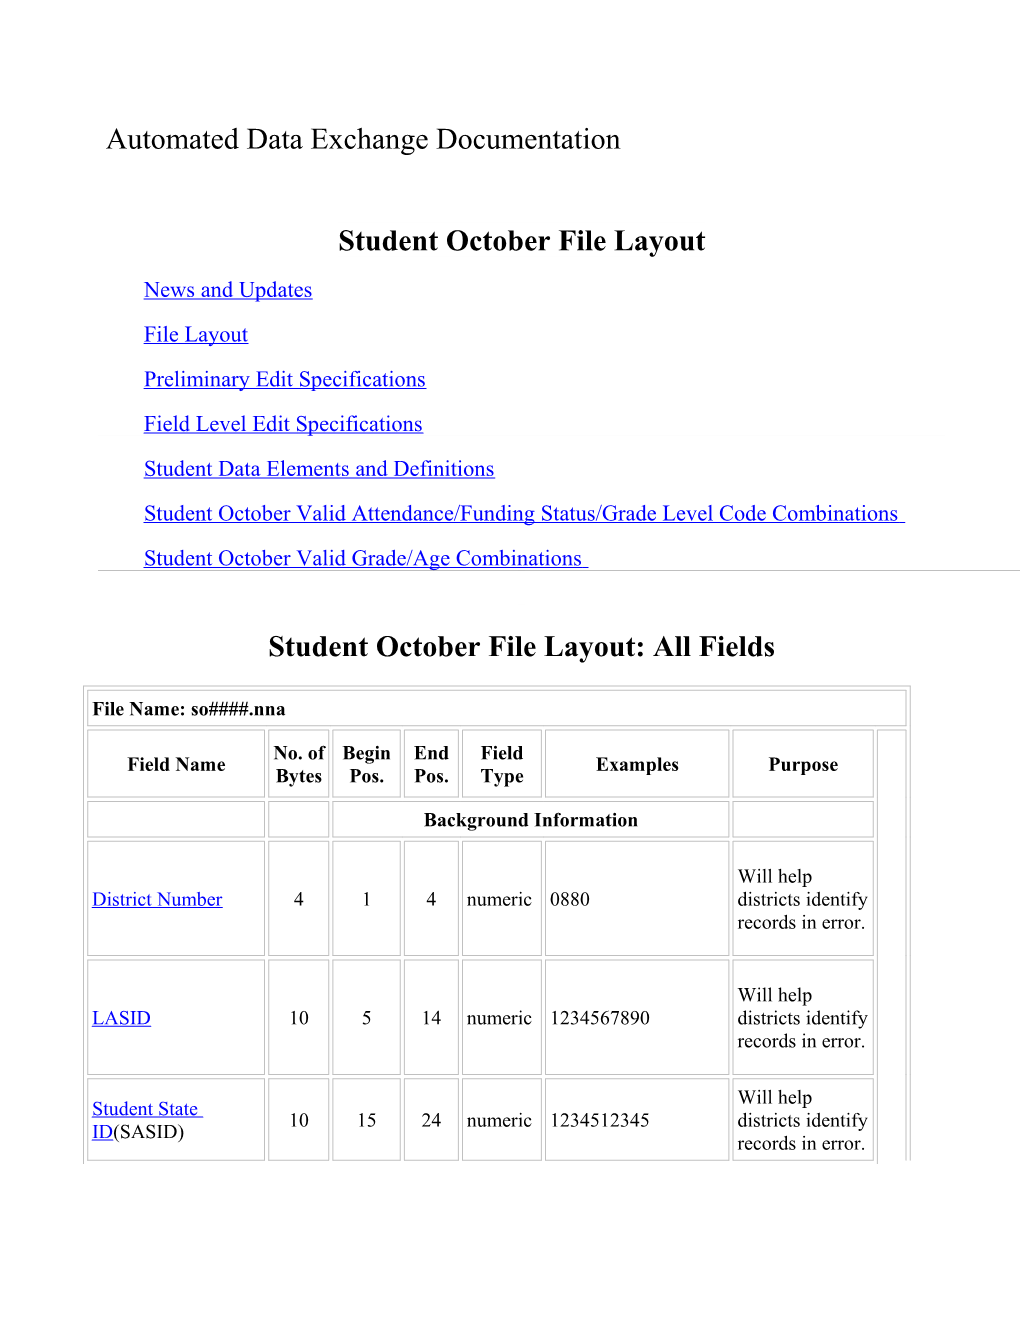 Student October File Layout